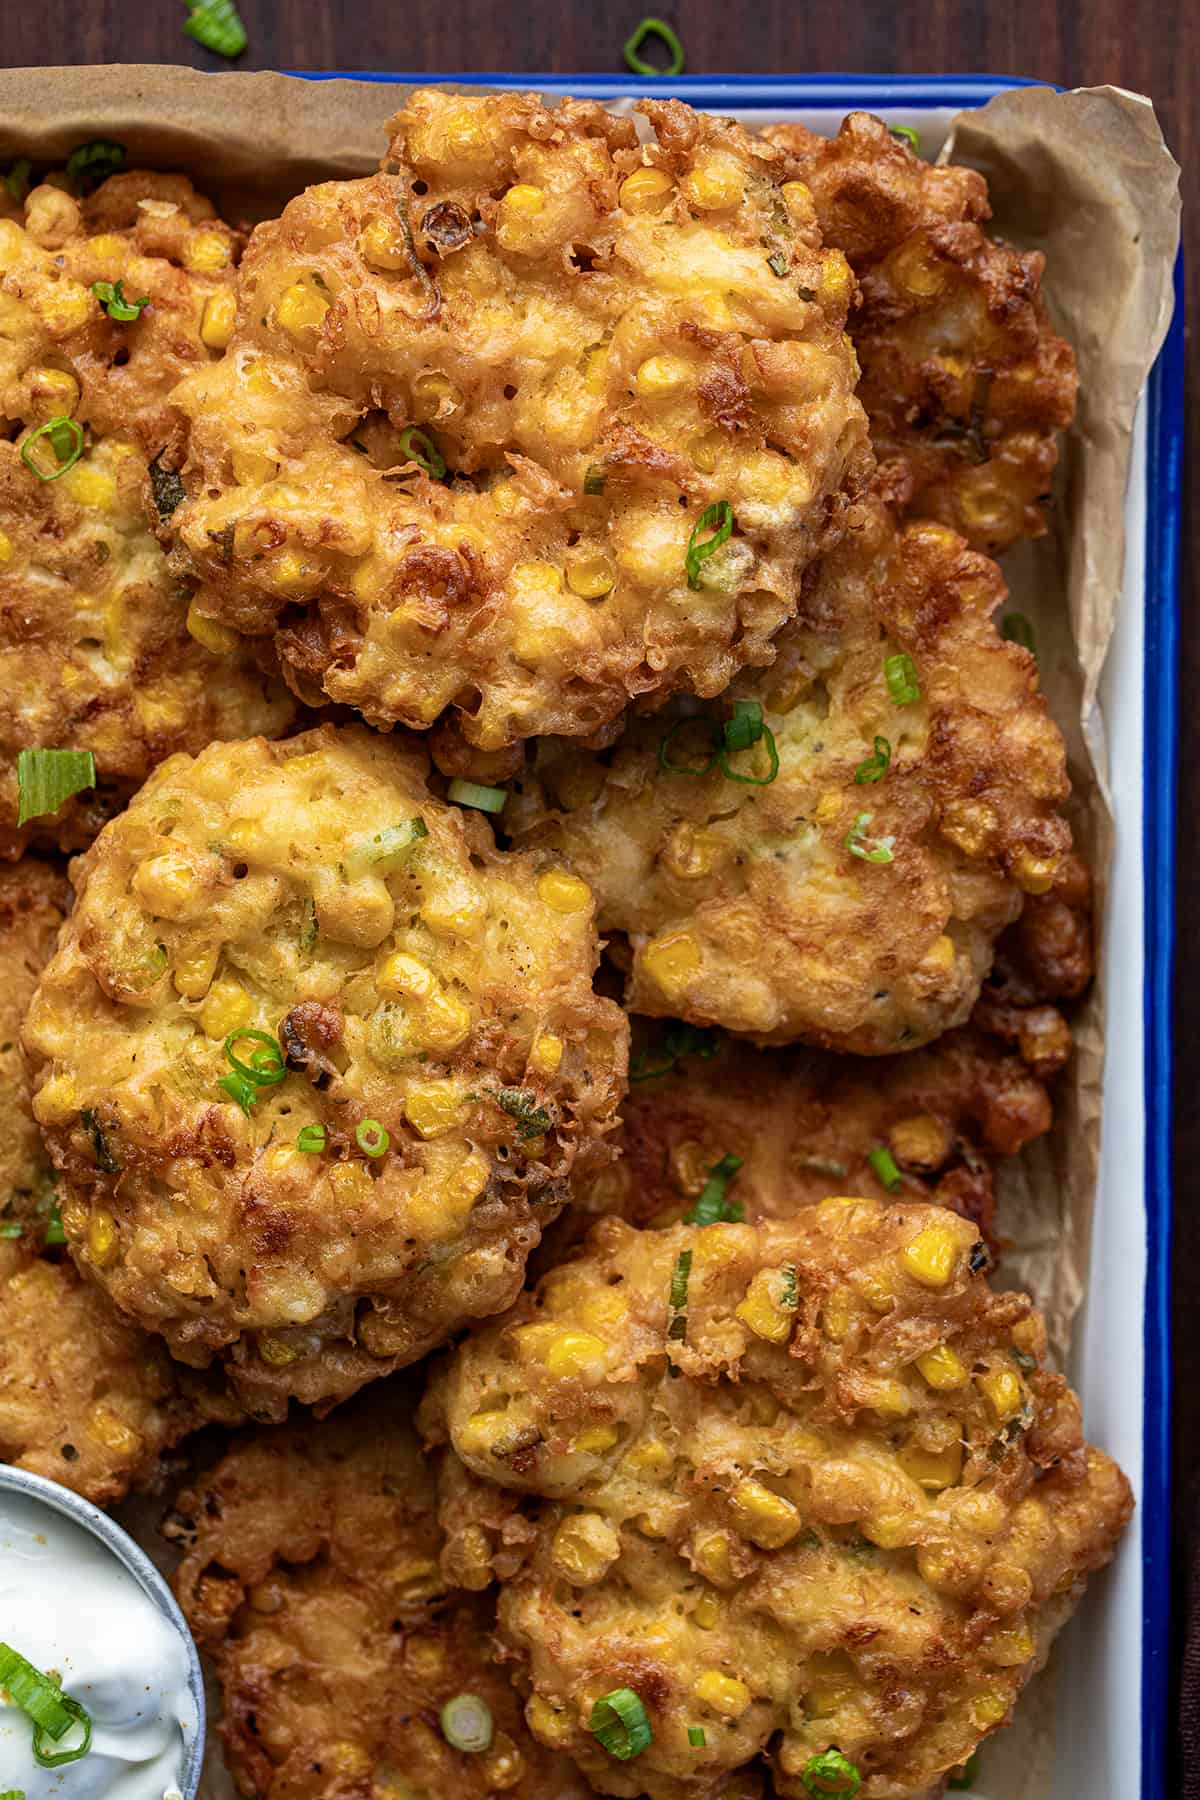 Close up of Corn Fritters from Overhead Showing Detail.